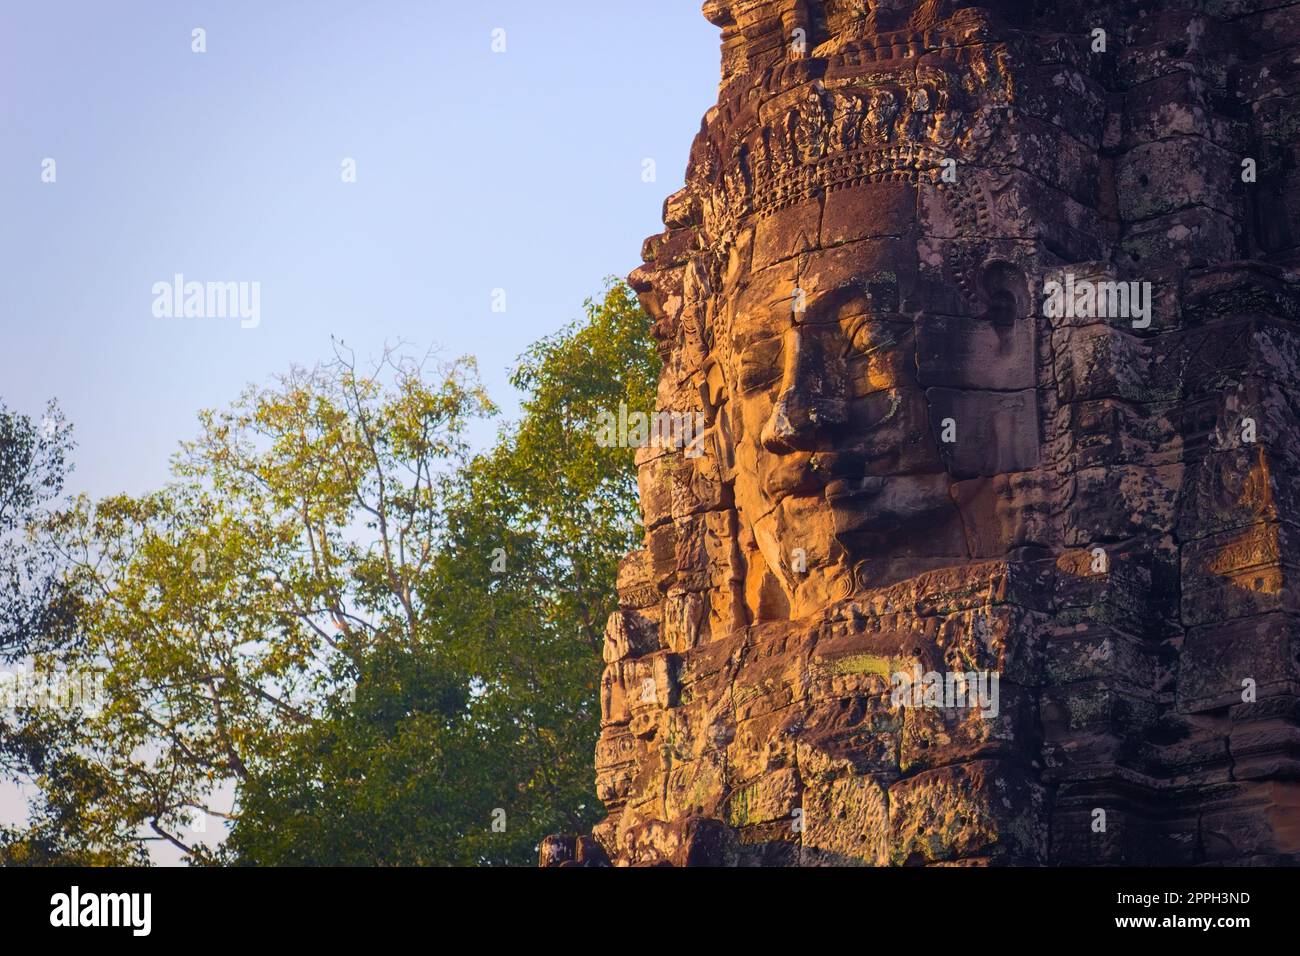 Cambodian stone face at Bayon temple, located in Angkor, Cambodia, ancient capital of the Khmer empire. Stock Photo